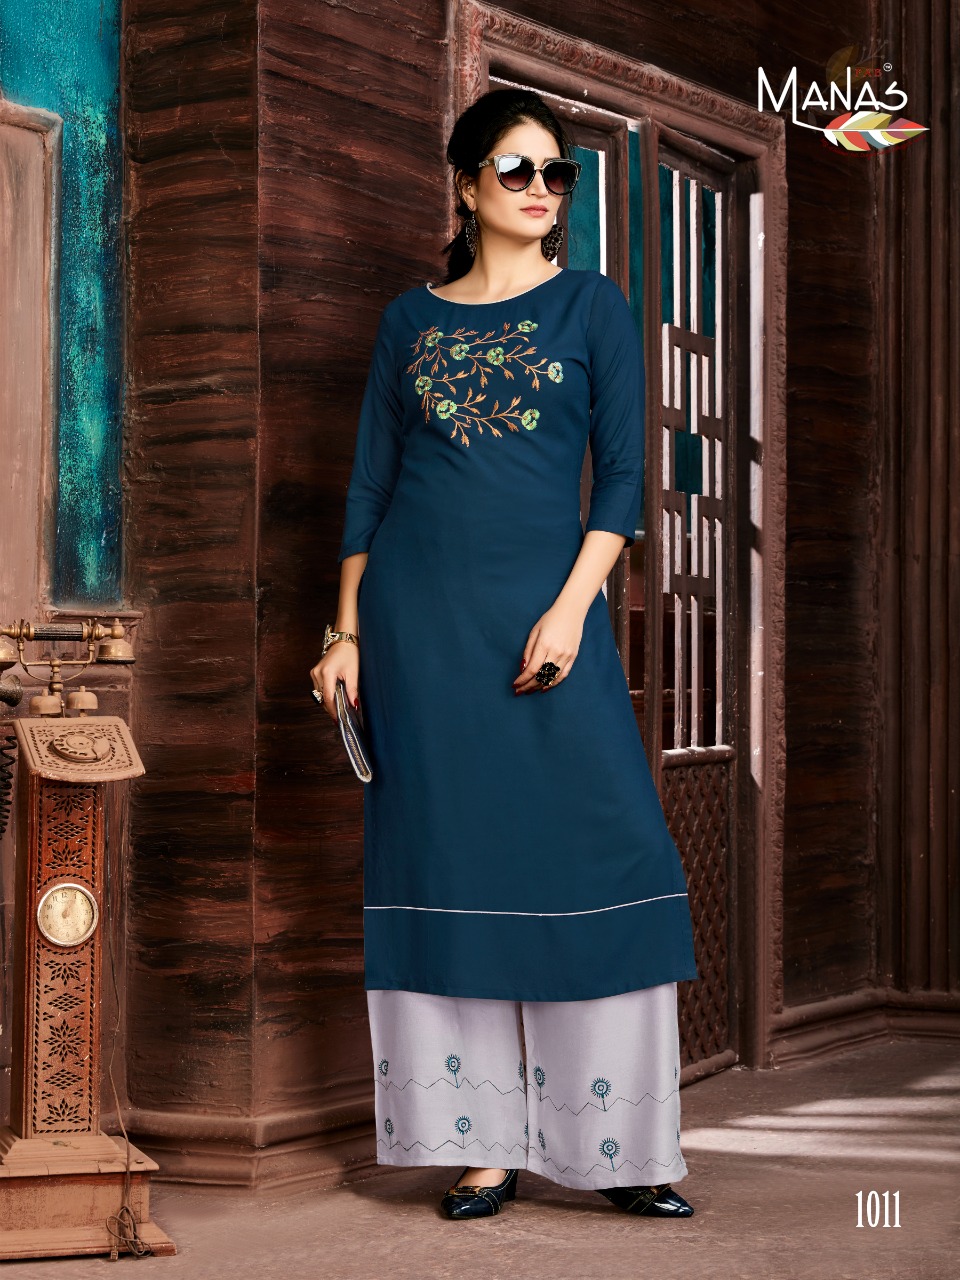 Manas anishka vol-3 classy catchy look Kurties in wholesale prices